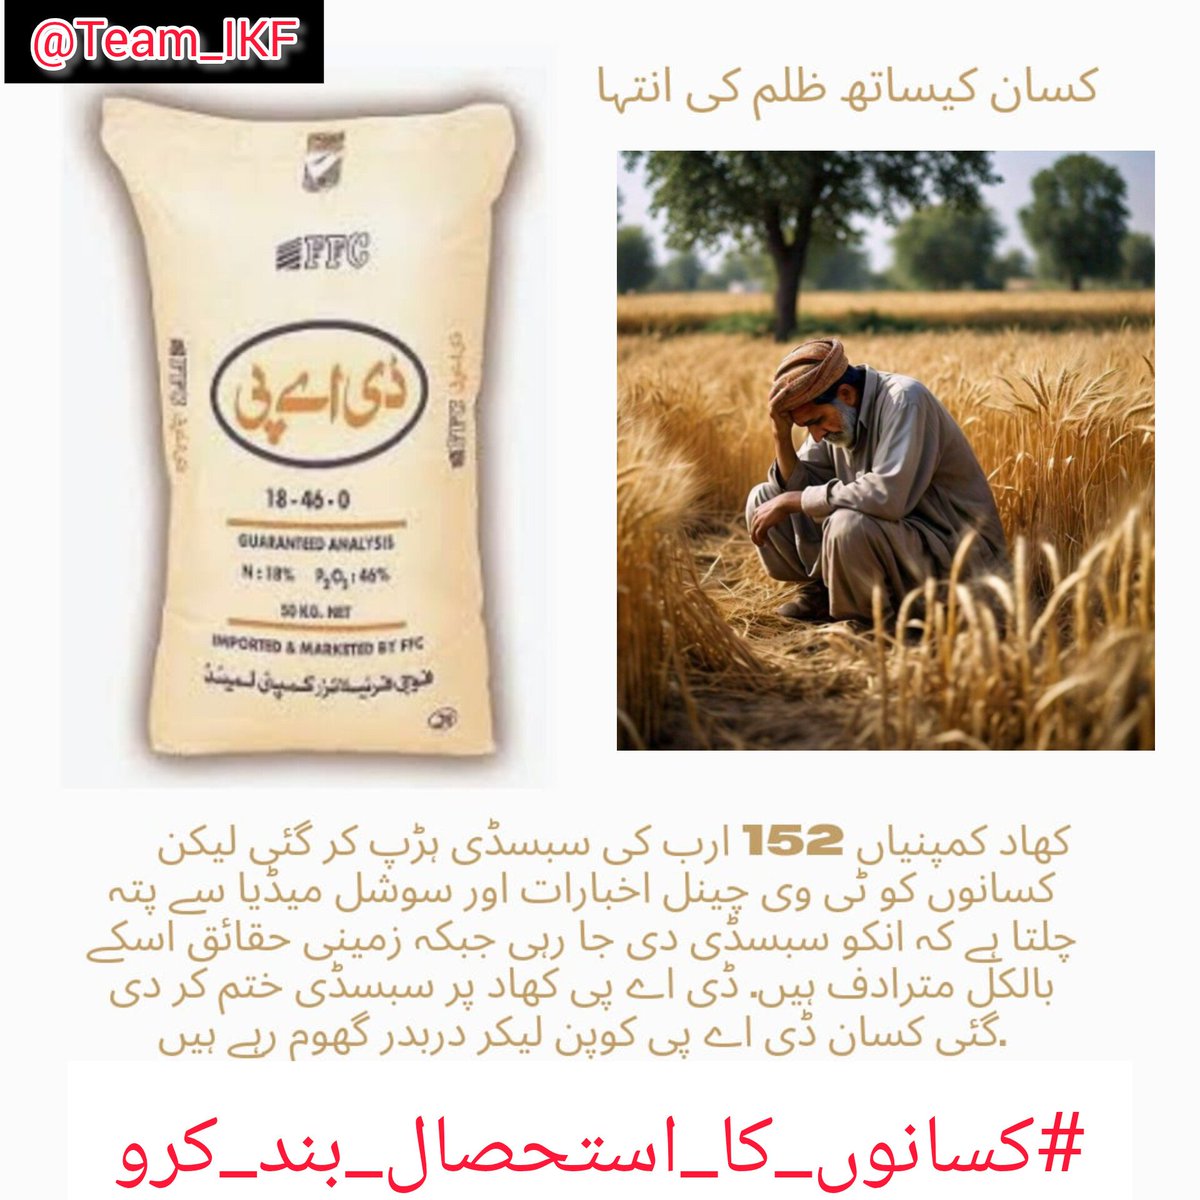 Idemand that the unjustly imprisoned farmers be released @Team_IKF #کسانوں_کا_استحصال_بند_کرو